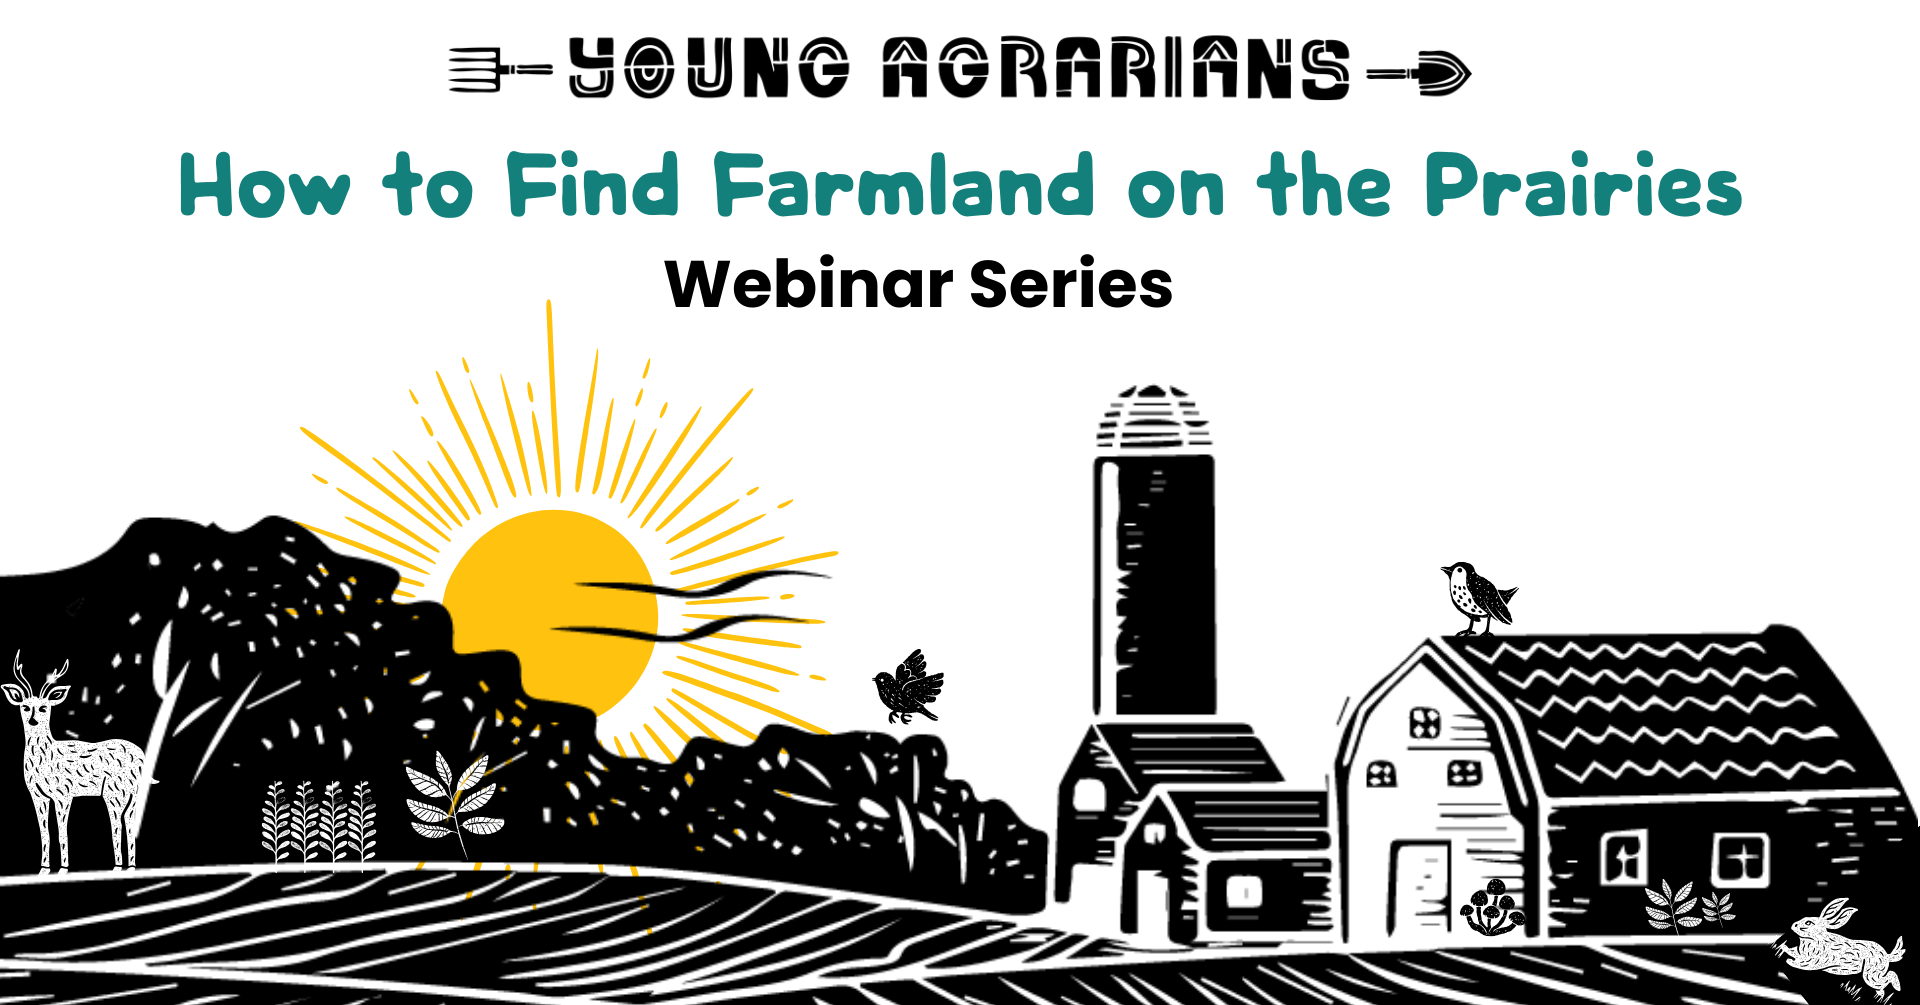 How to Find Farmland on the Prairies Image